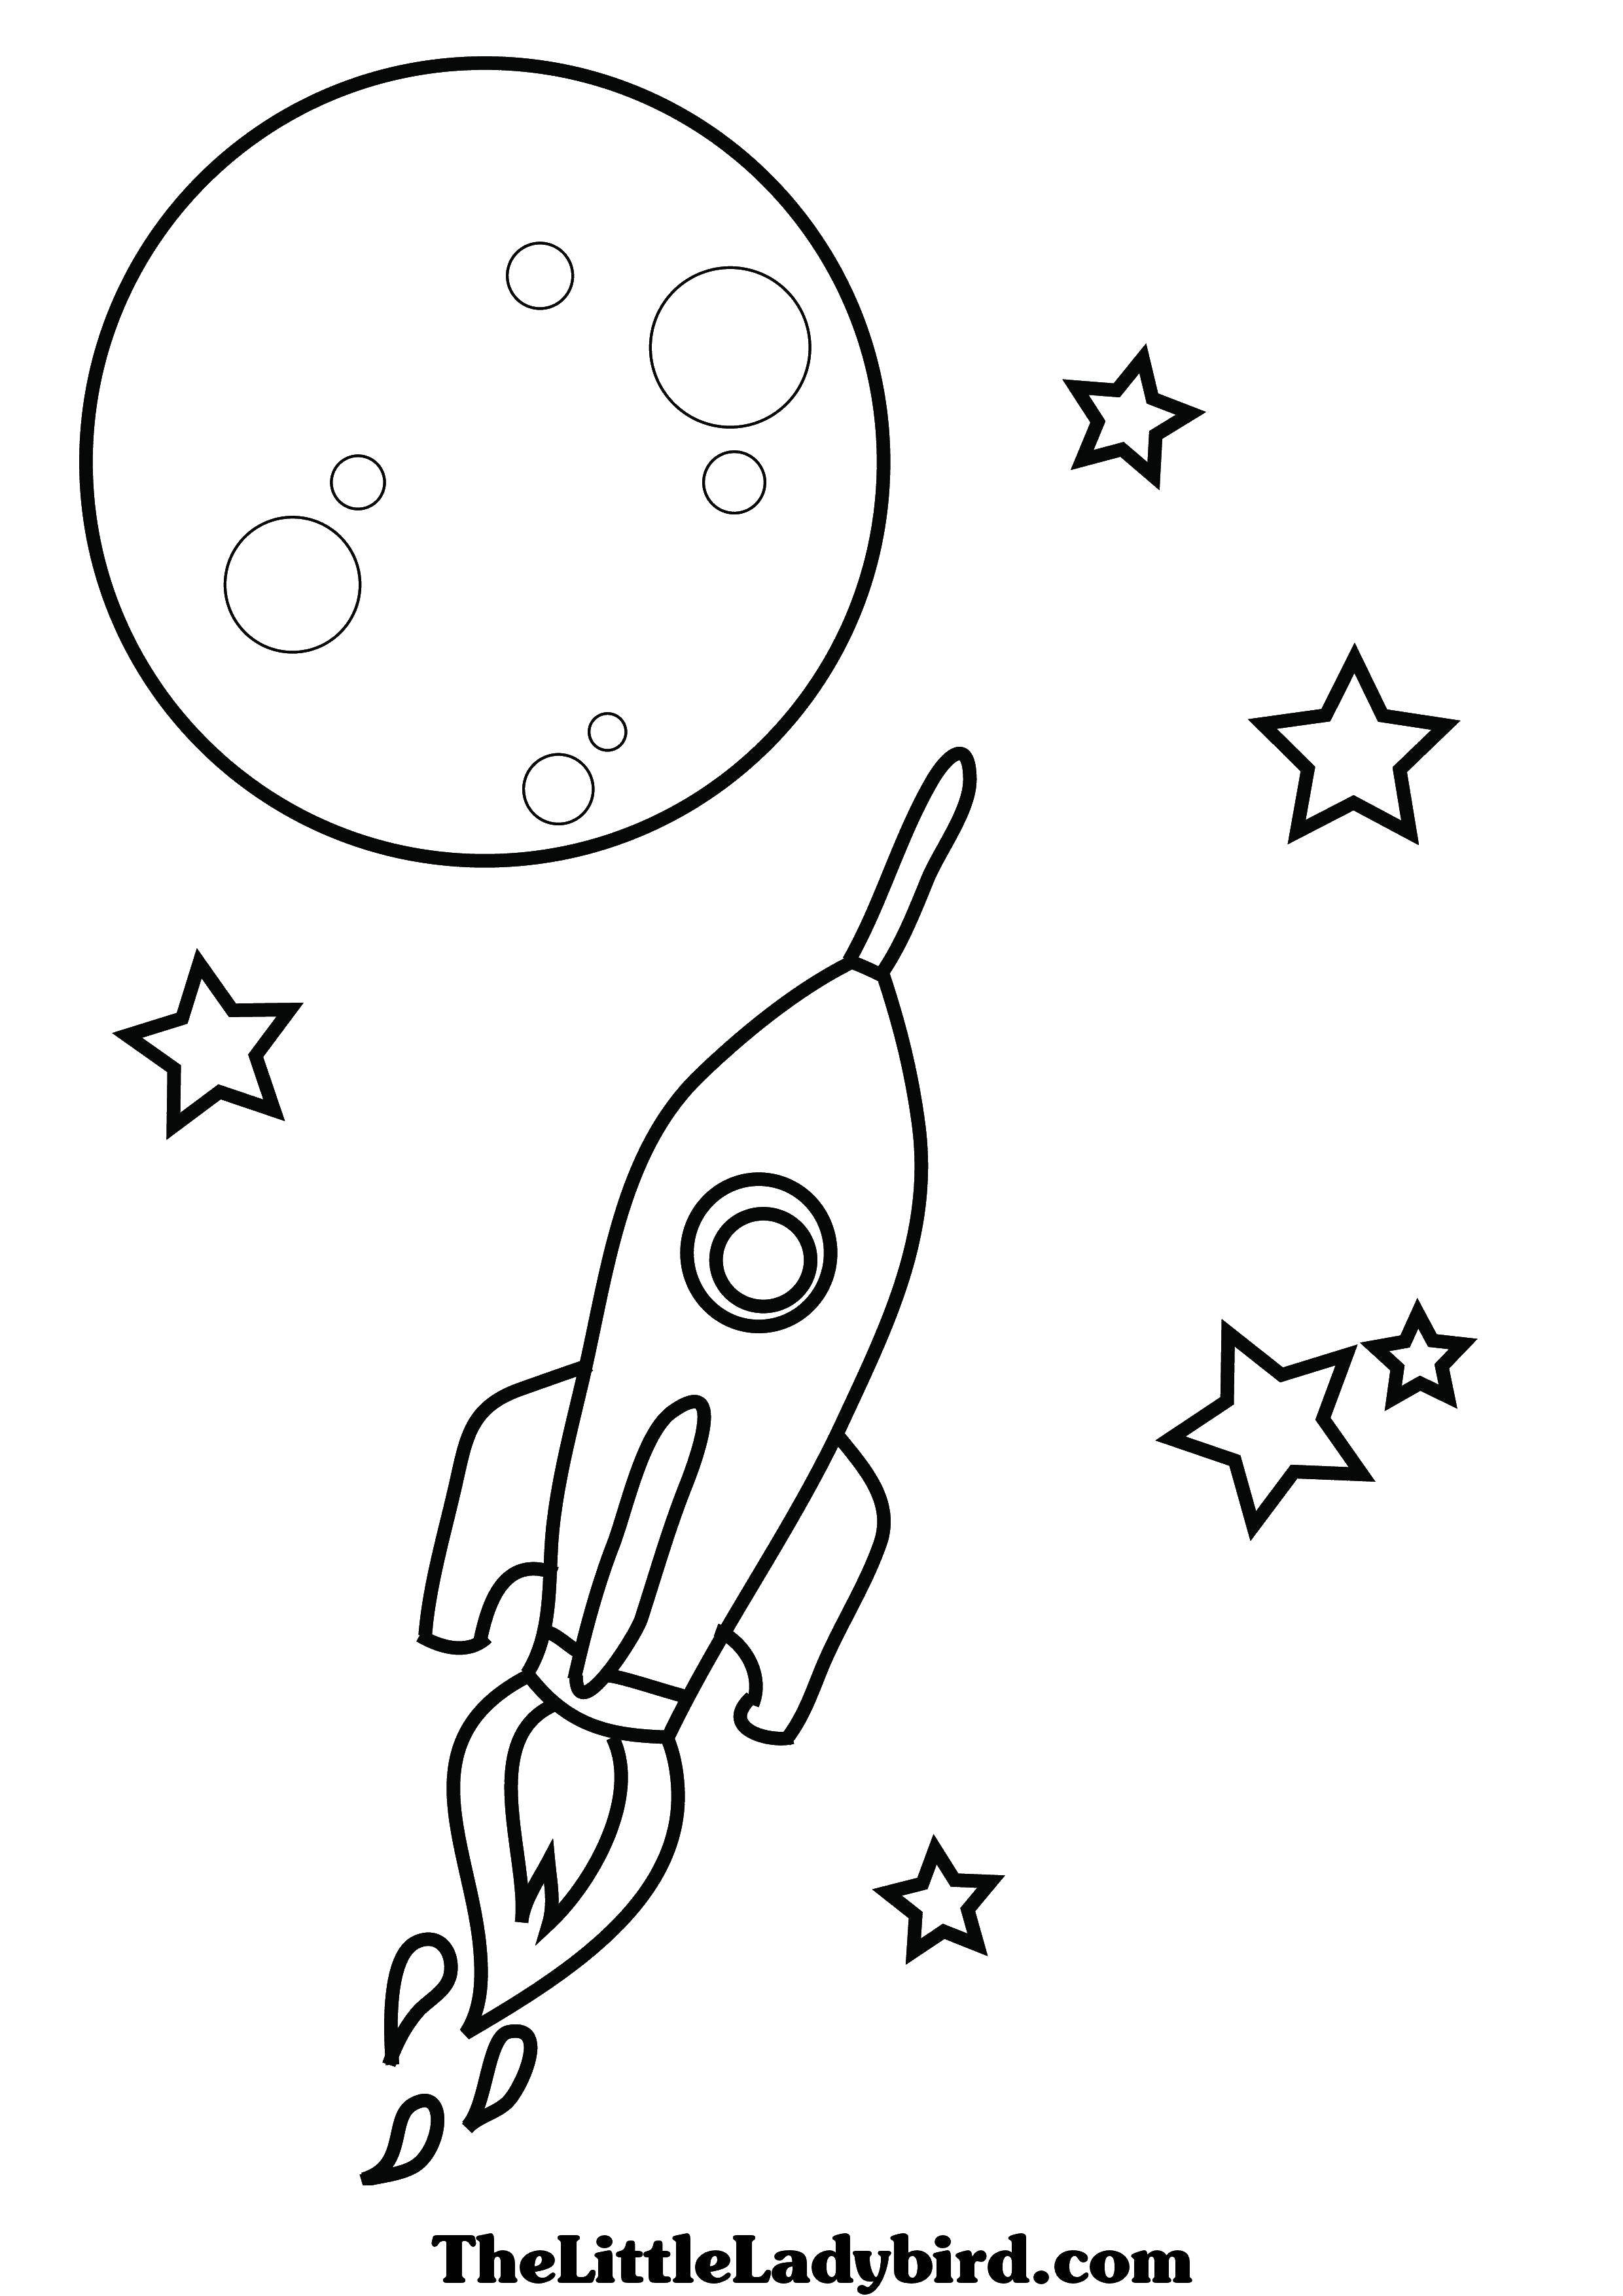 Coloring Rocket, moon, stars. Category spaceships. Tags:  space, planets, stars, rocket.